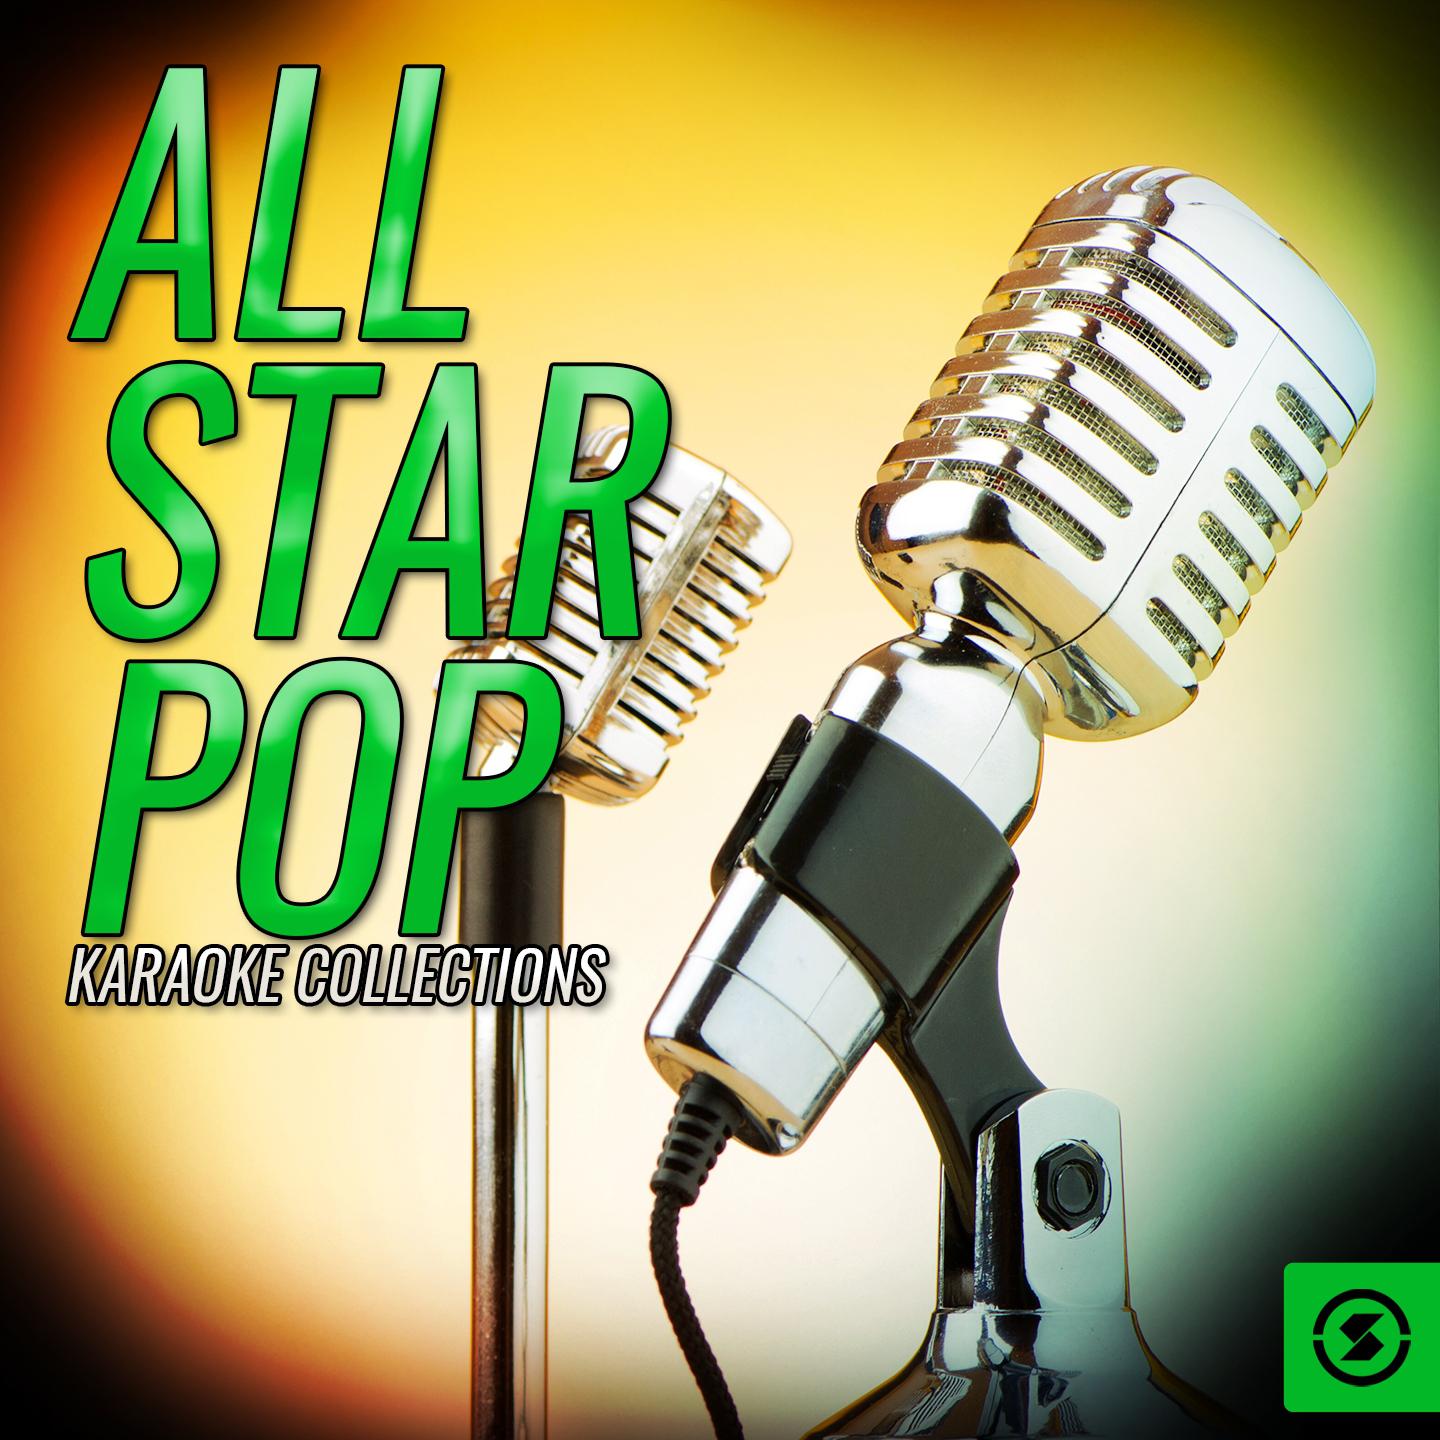 All Star Pop Karaoke Collections